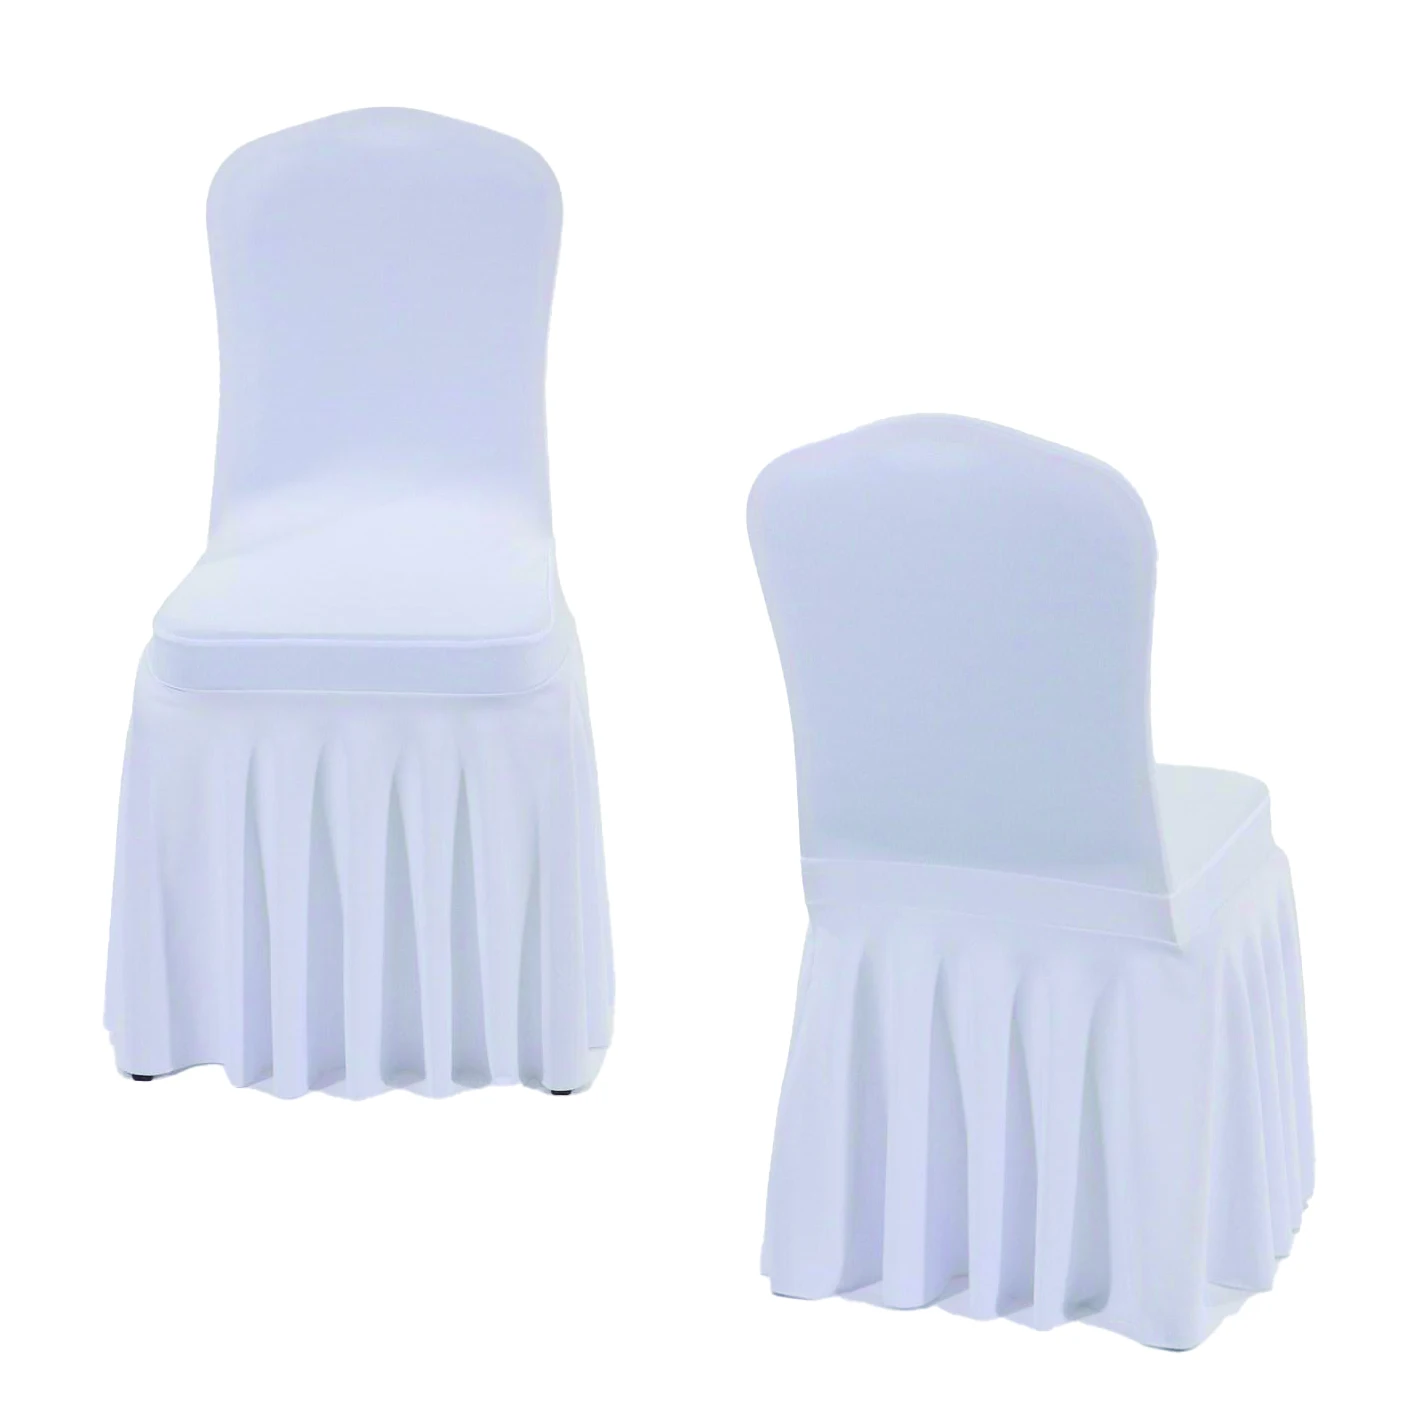 

Stretch Chair cover,2 Pieces, Customers' request